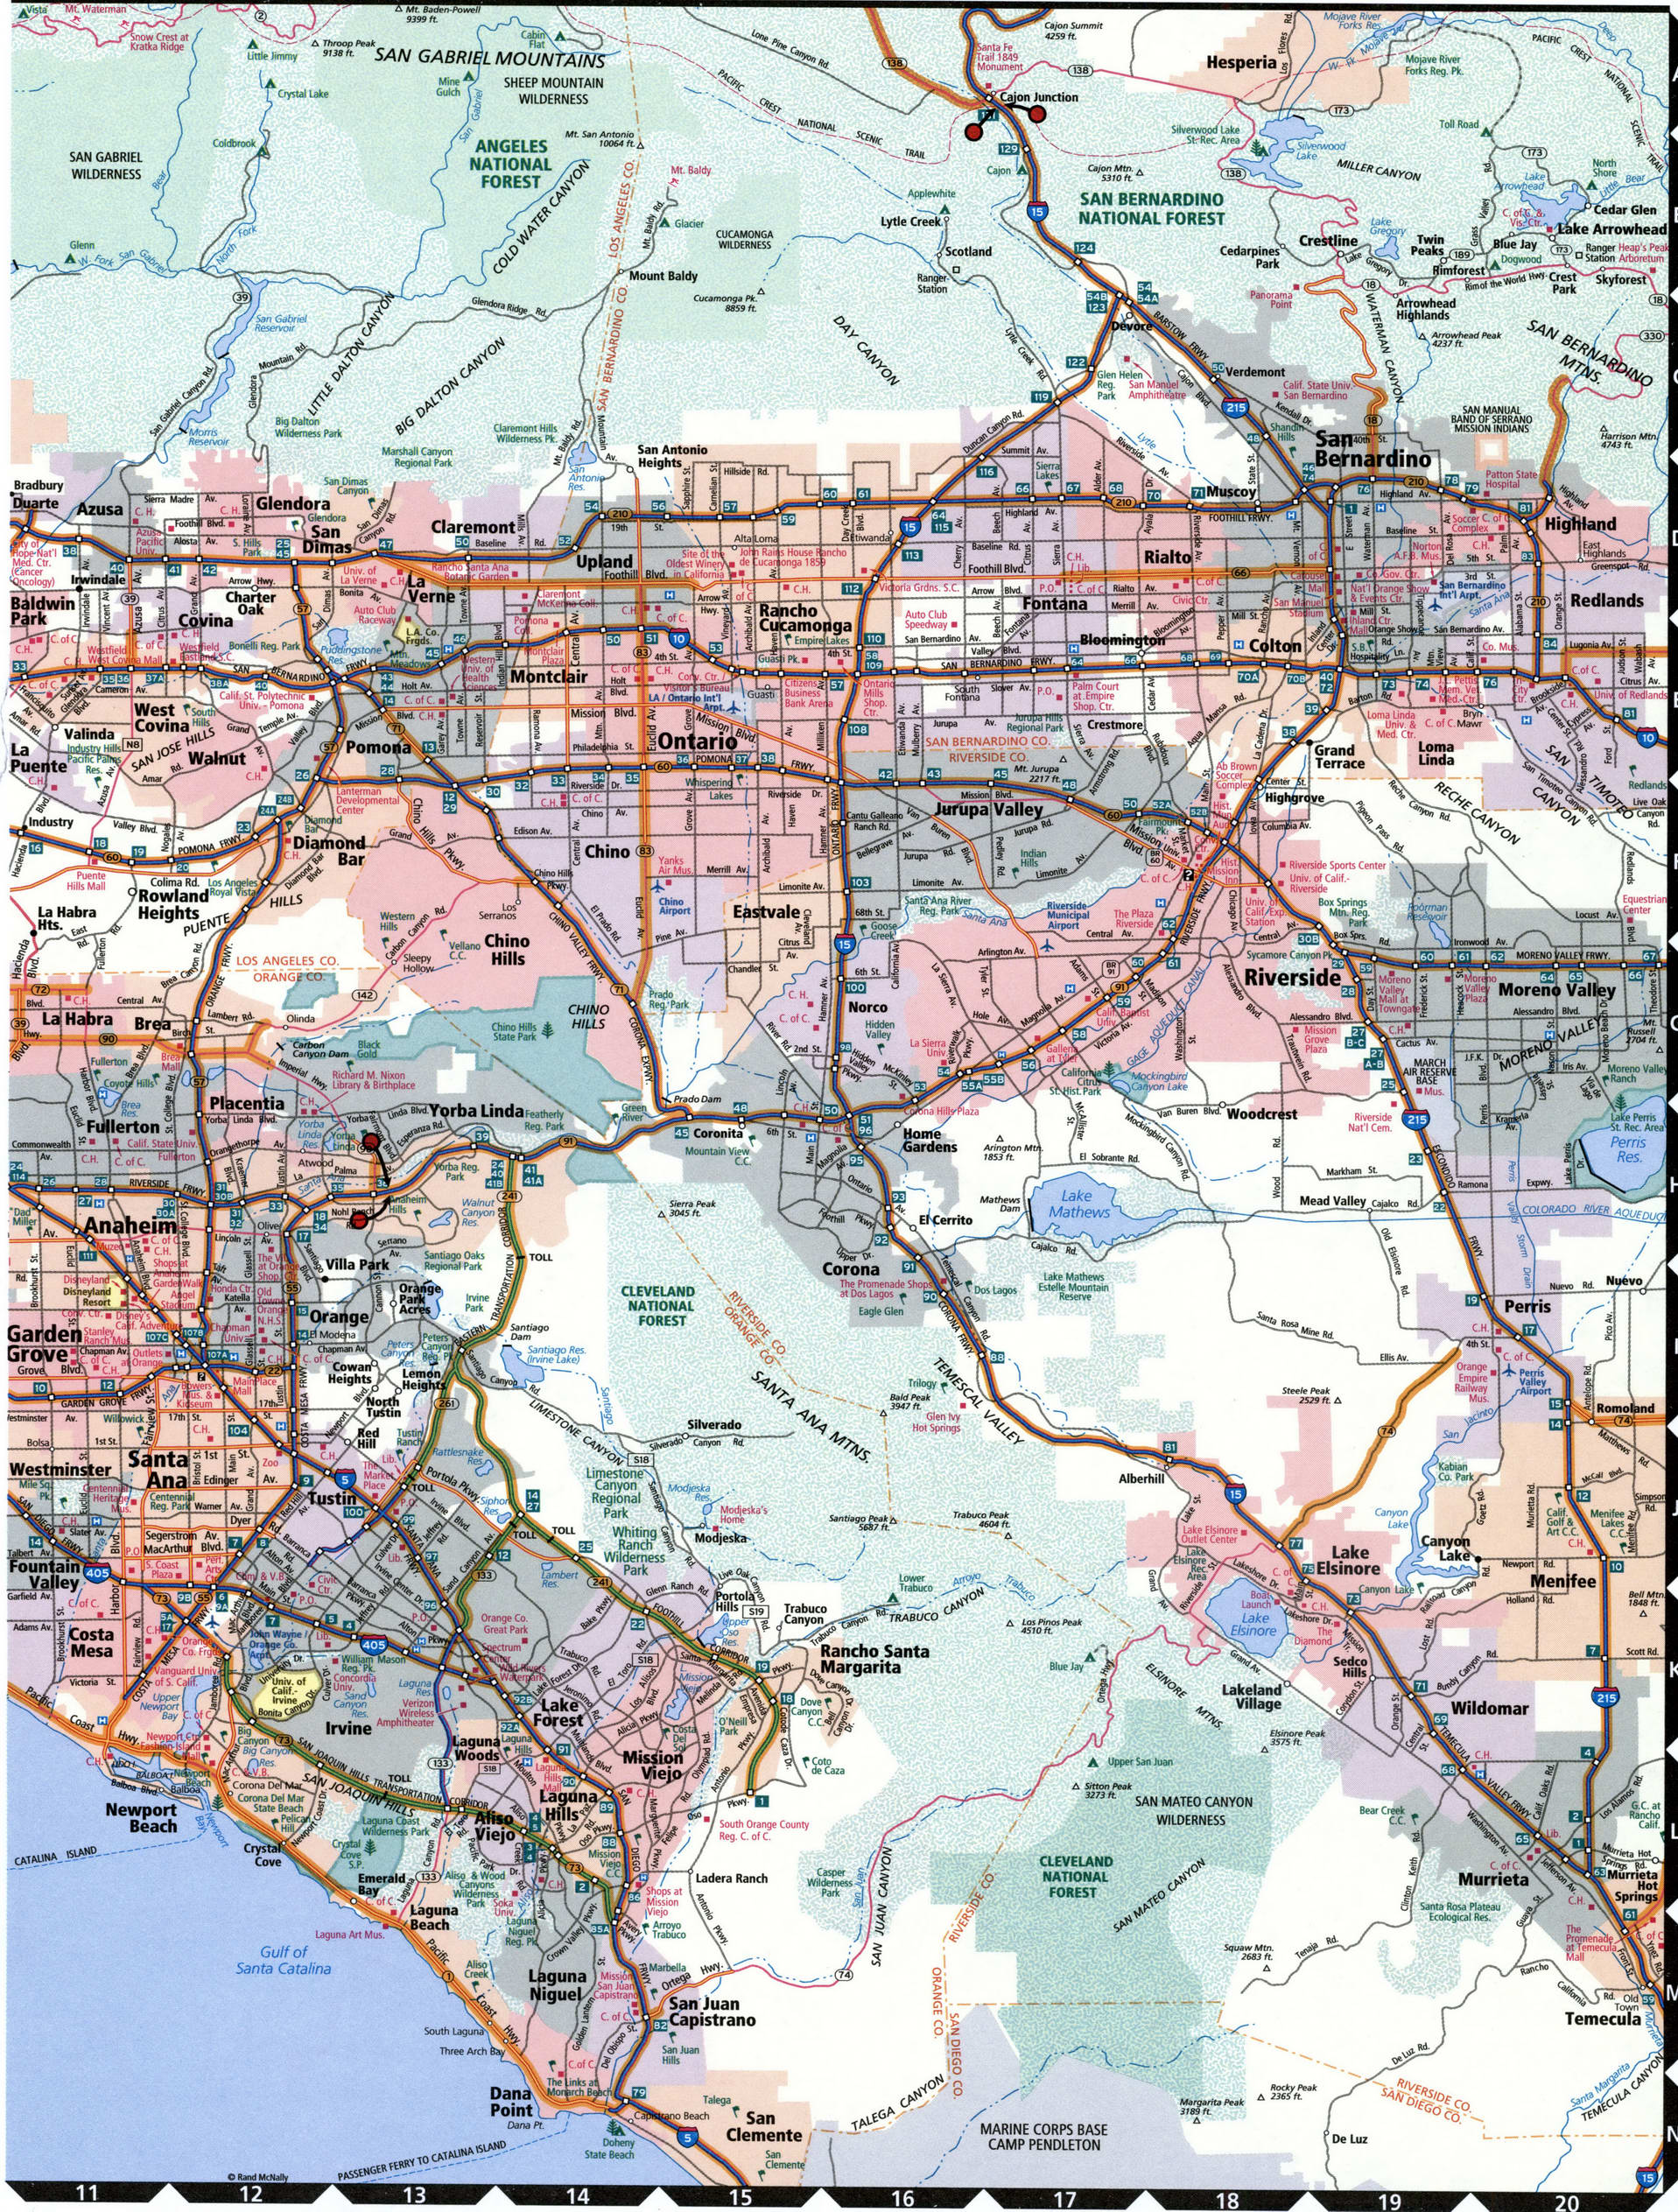 Los Angelos area road map for truck drivers region toll free highways ...